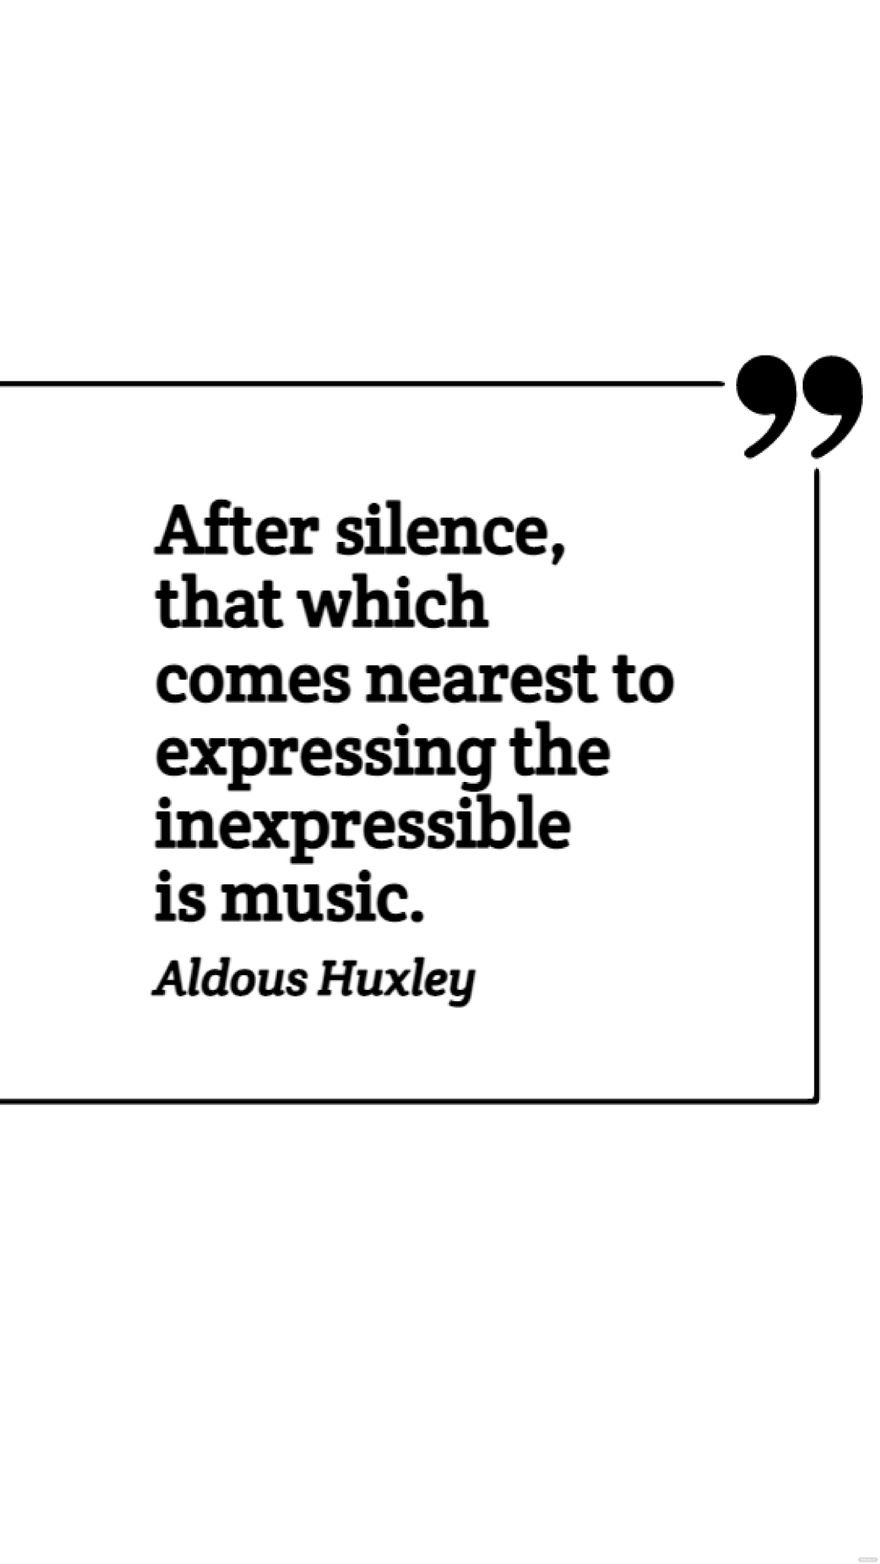 Free Aldous Huxley - After silence, that which comes nearest to expressing the inexpressible is music. in JPG